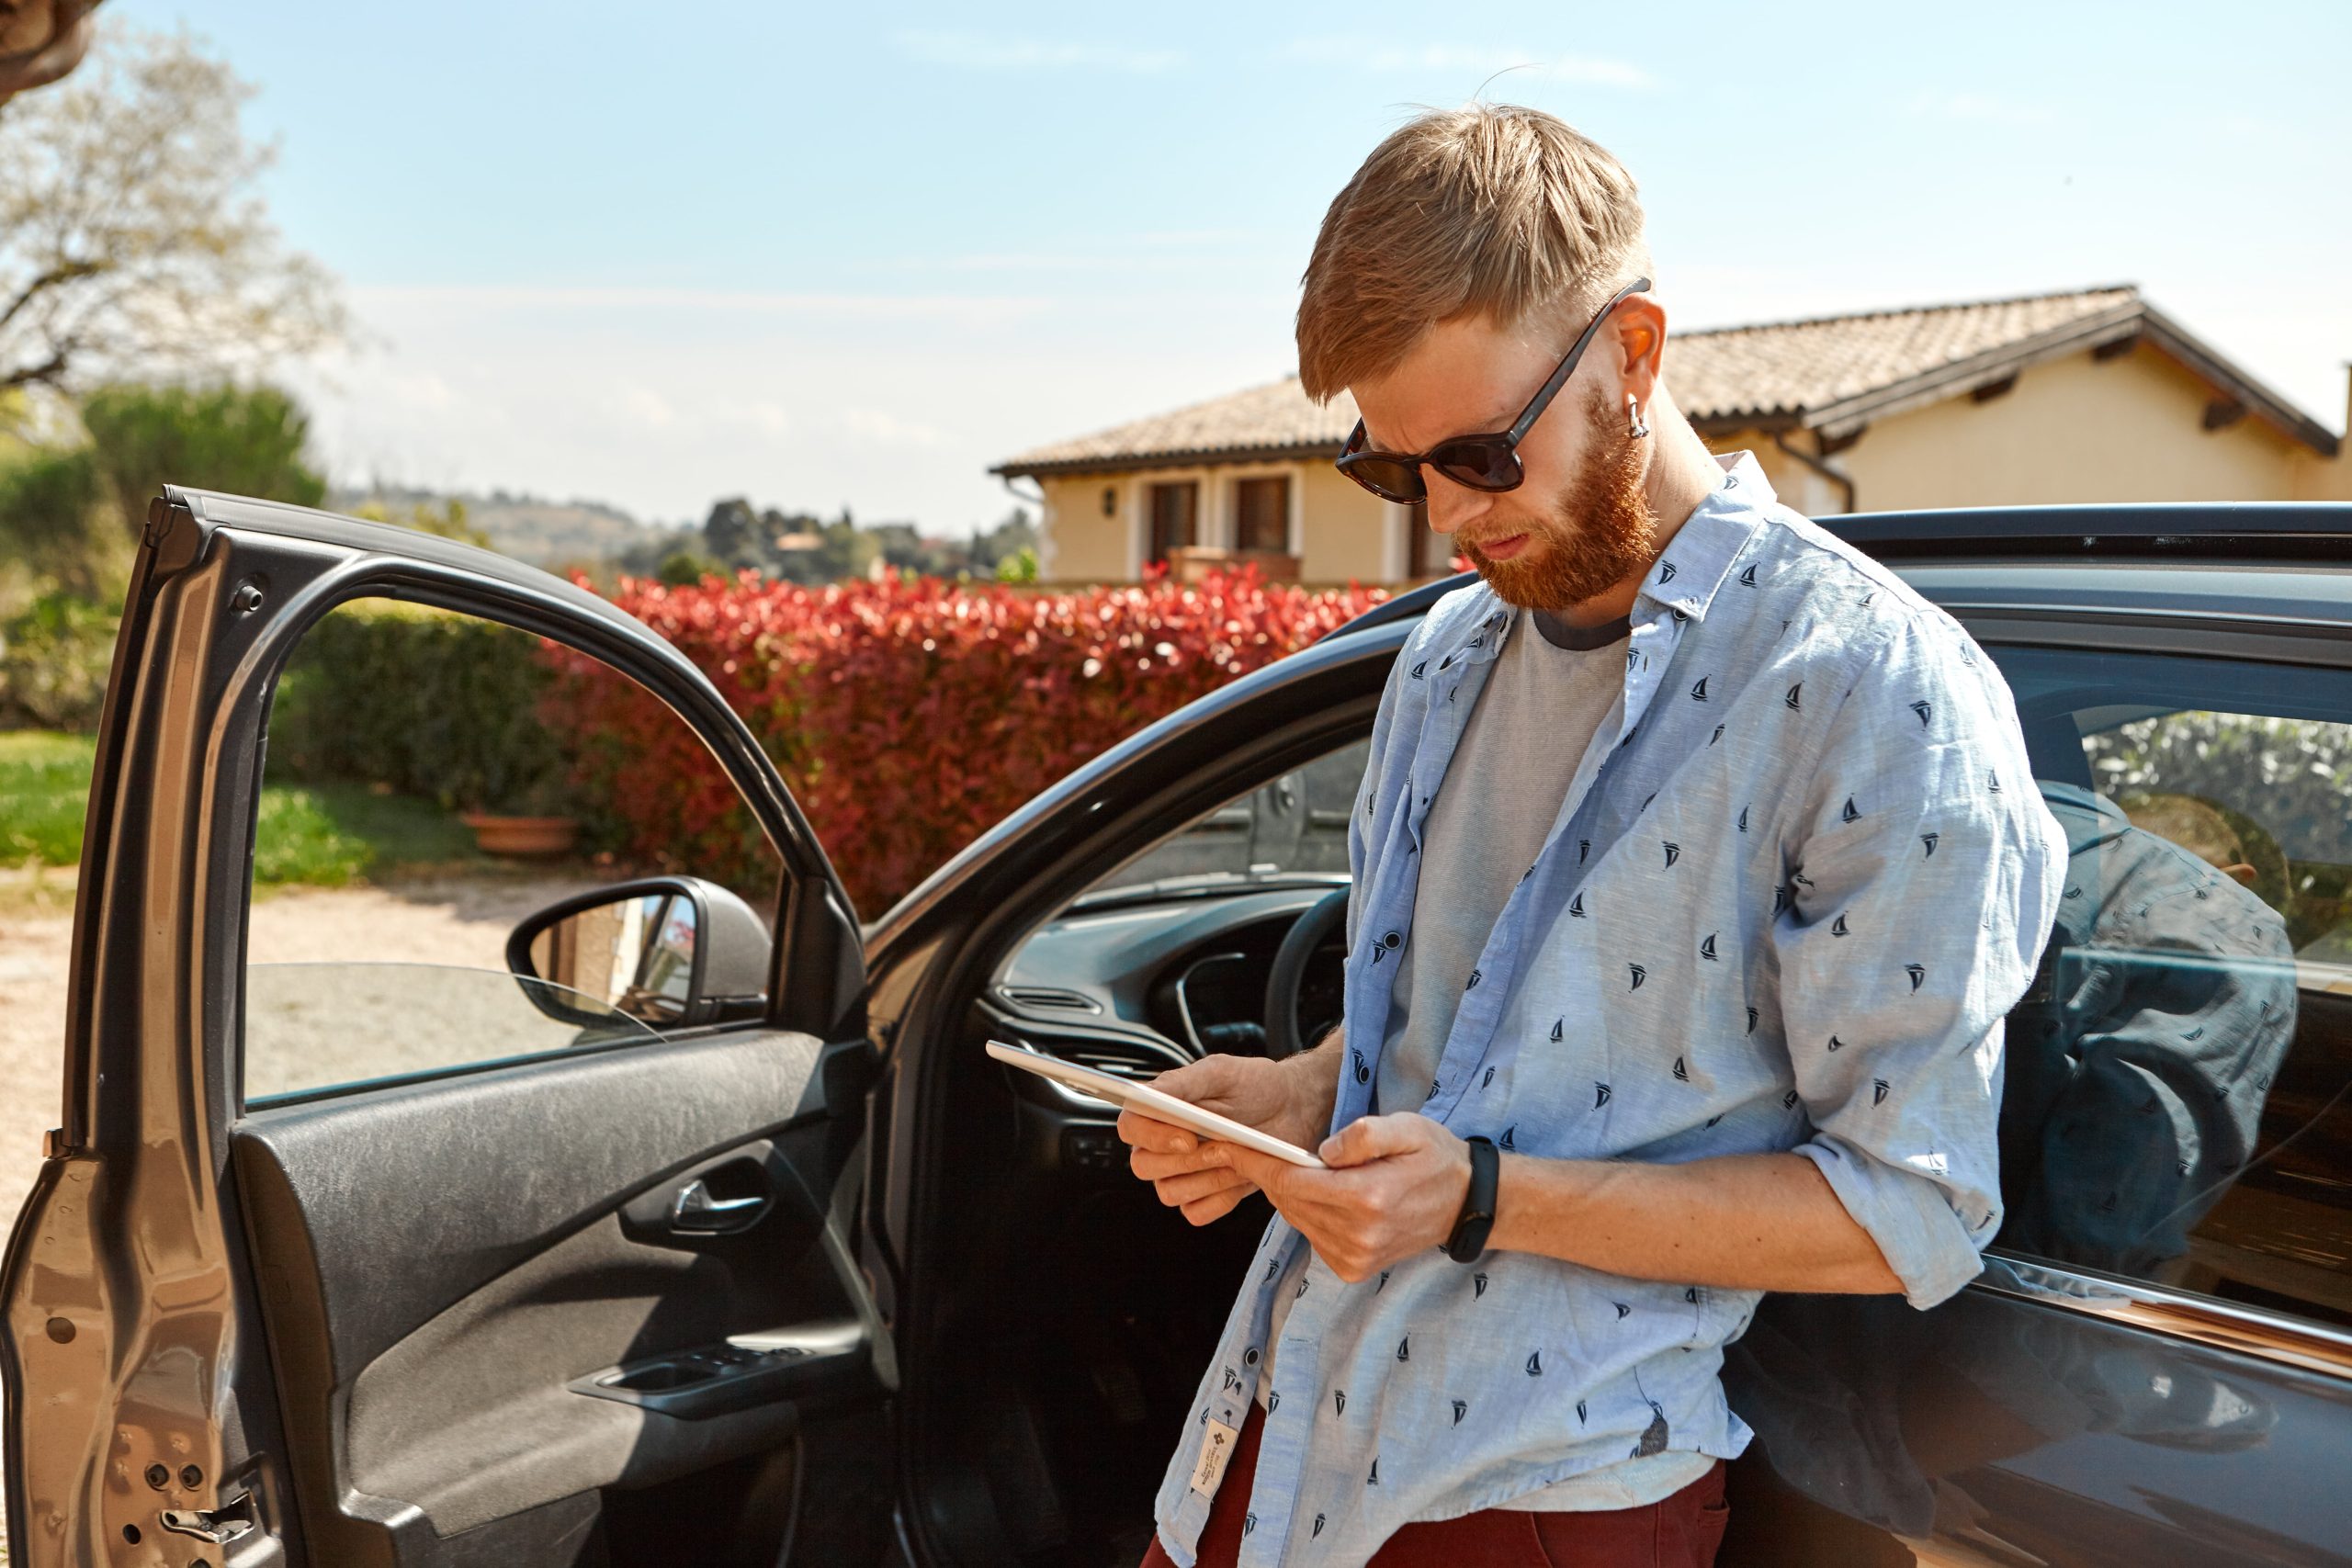 outdoor-image-handsome-trendy-hipster-guy-with-fuzzy-beard-standing-his-car-min